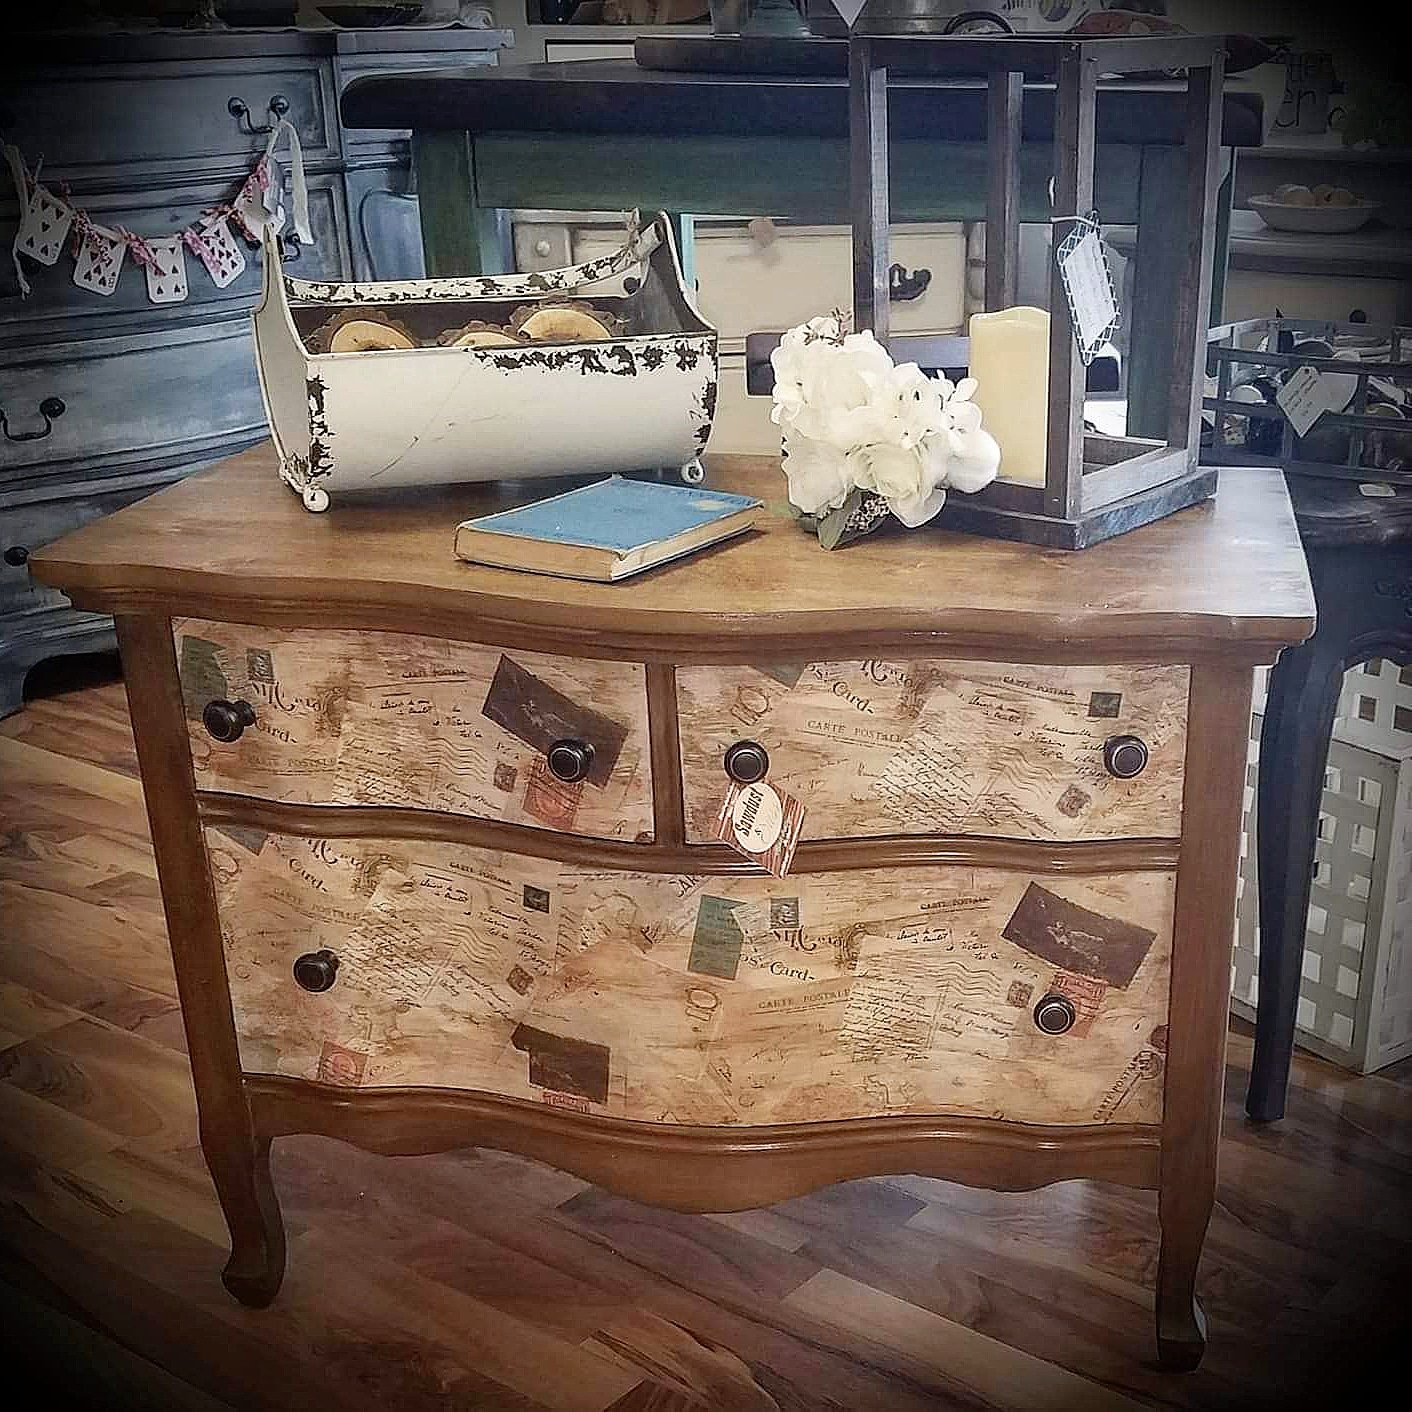 Wildwood Boutique is a special place that features beautiful refinished furniture and unique home decor.